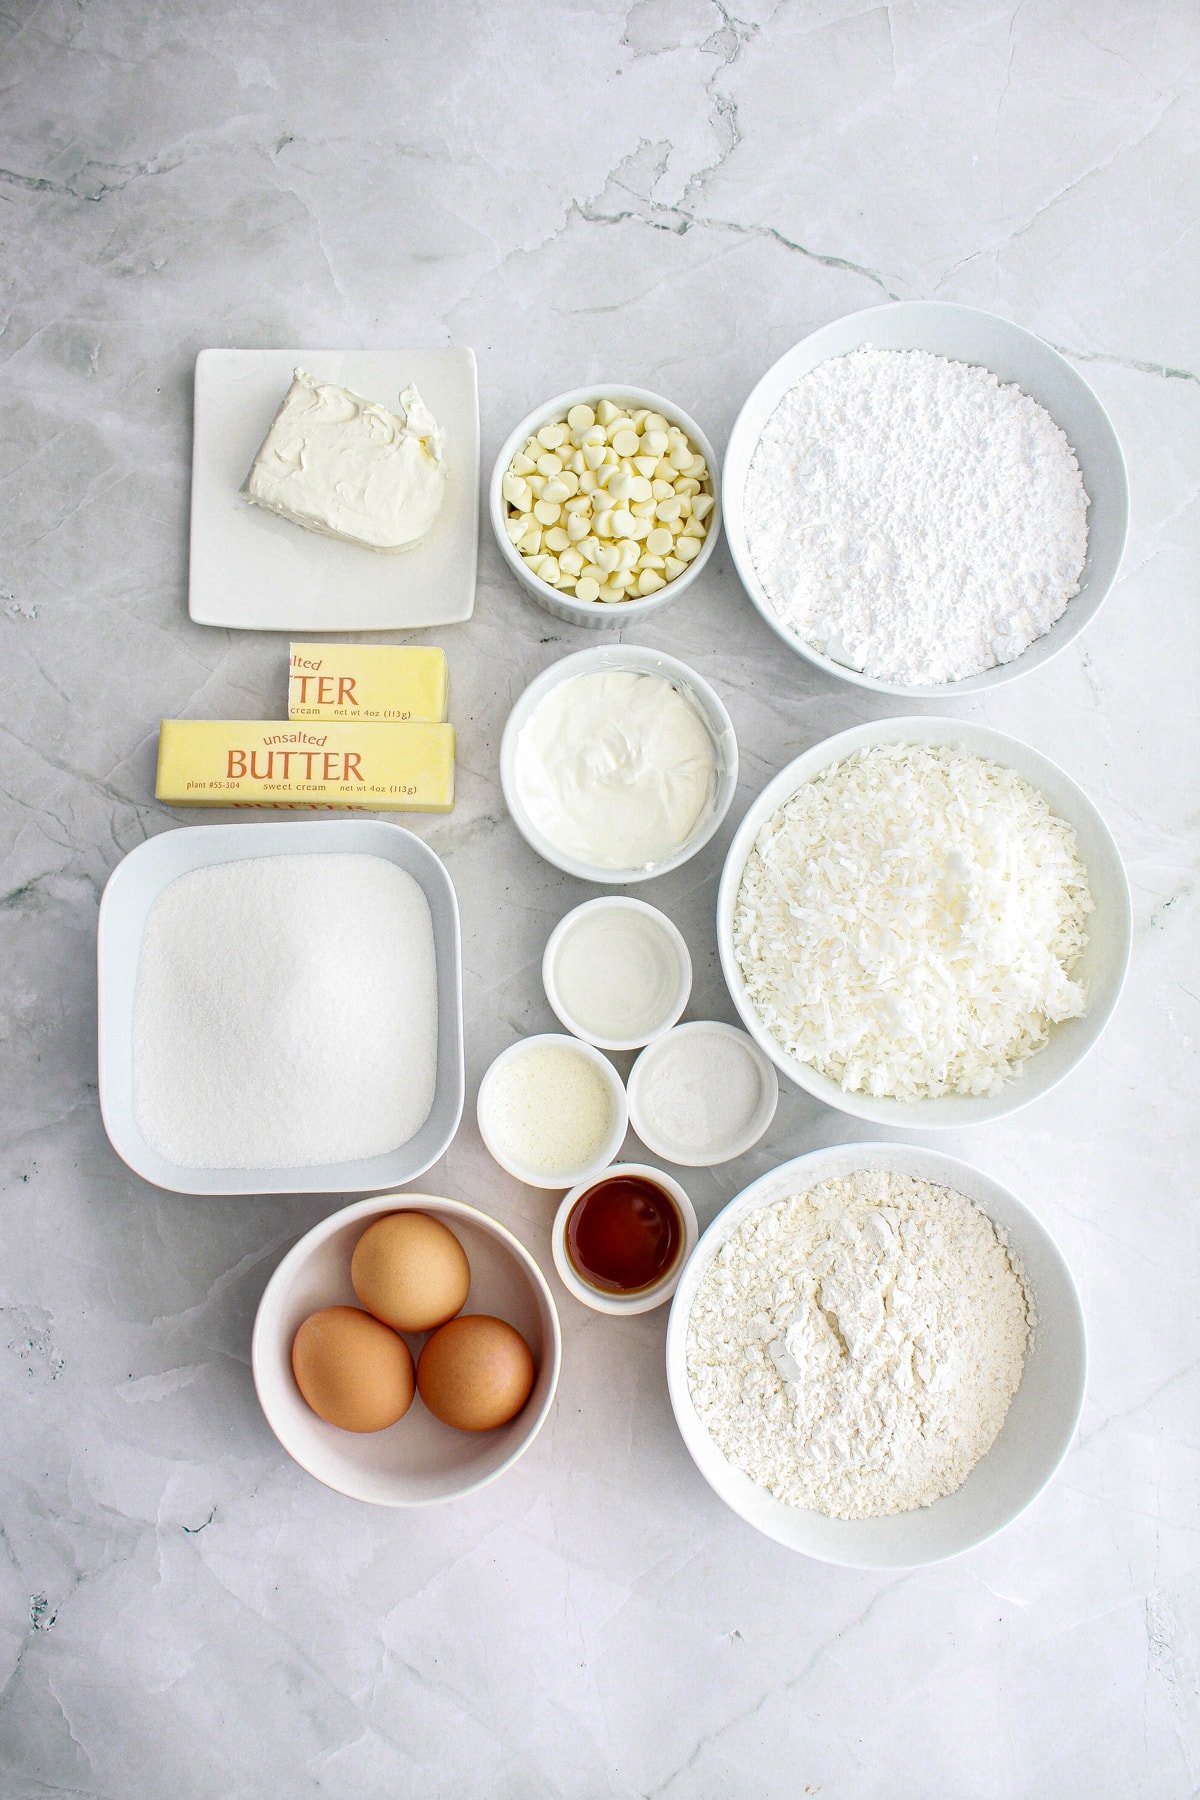 ingredients needed to make White Chocolate Coconut Bundt Cake